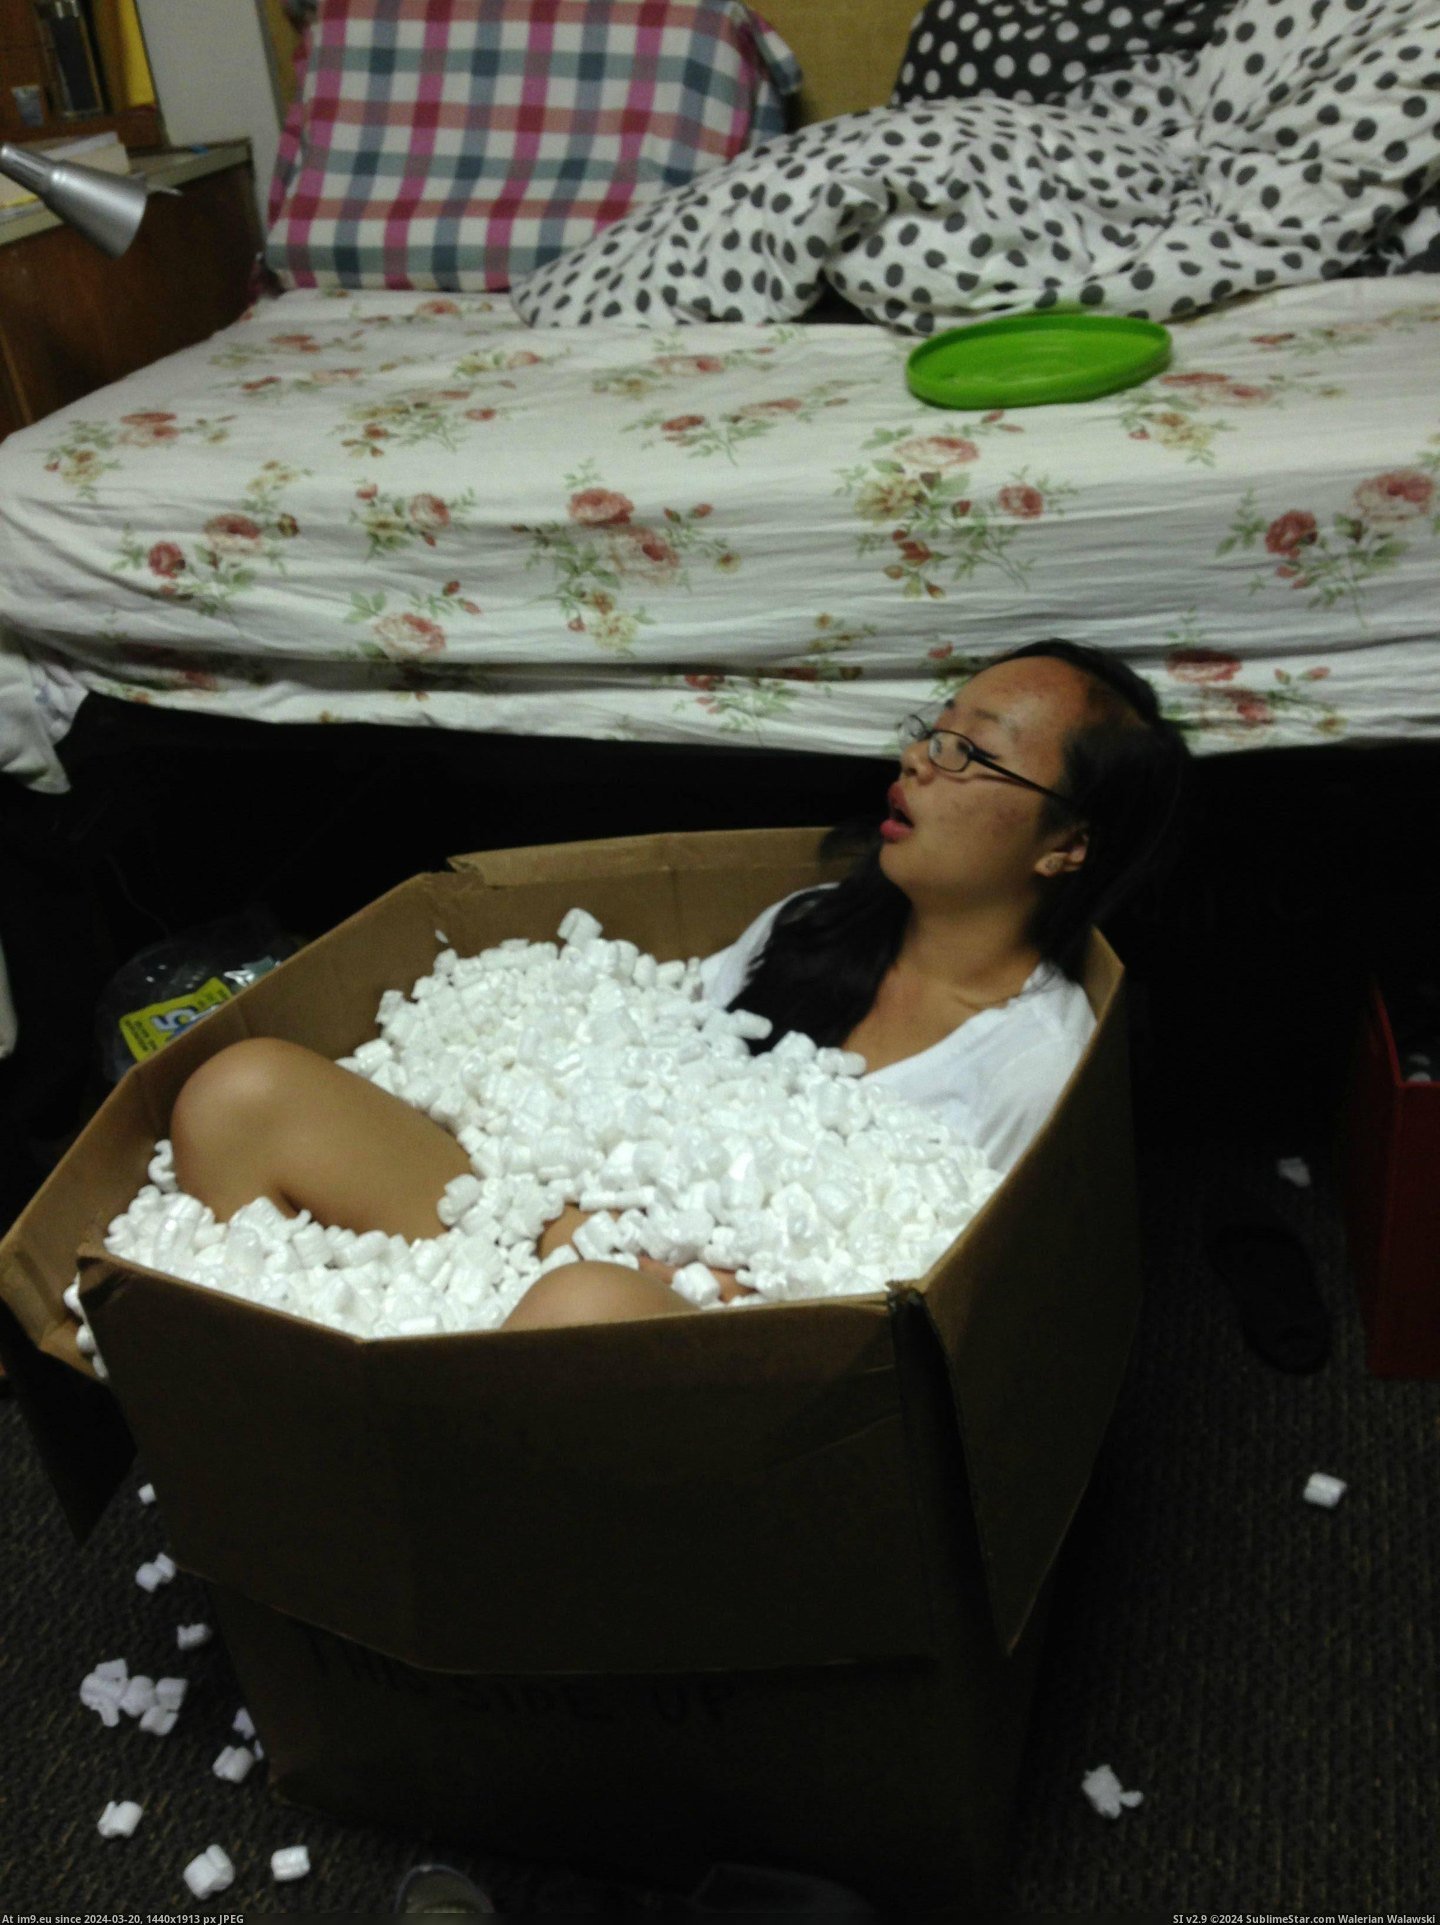 #Box #Find #Roommate #2am #Peanuts #Wake #Passed #Packing [Pics] I wake up at 2am to find my roommate passed out in a box of packing peanuts. Pic. (Изображение из альбом My r/PICS favs))